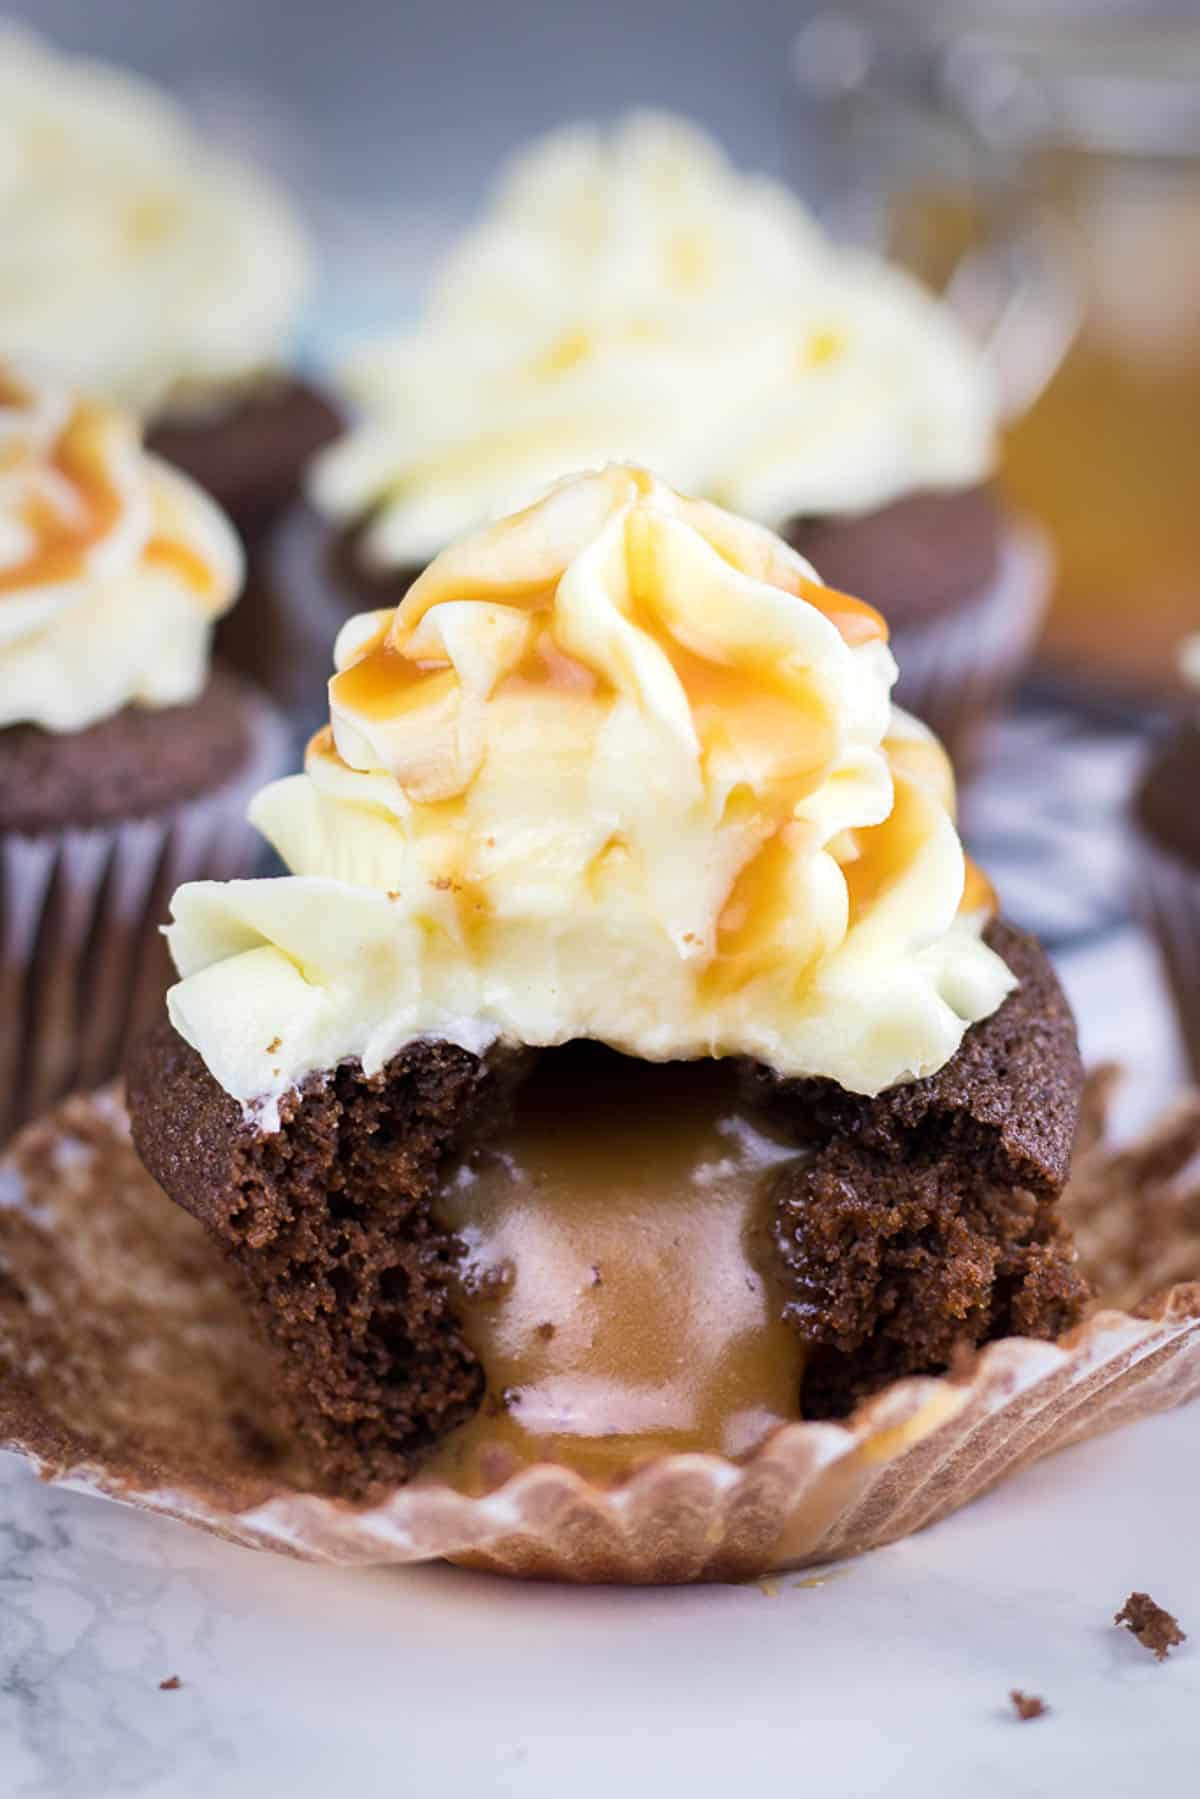 A bite shot od chocolate cupcakes with caramel filling.